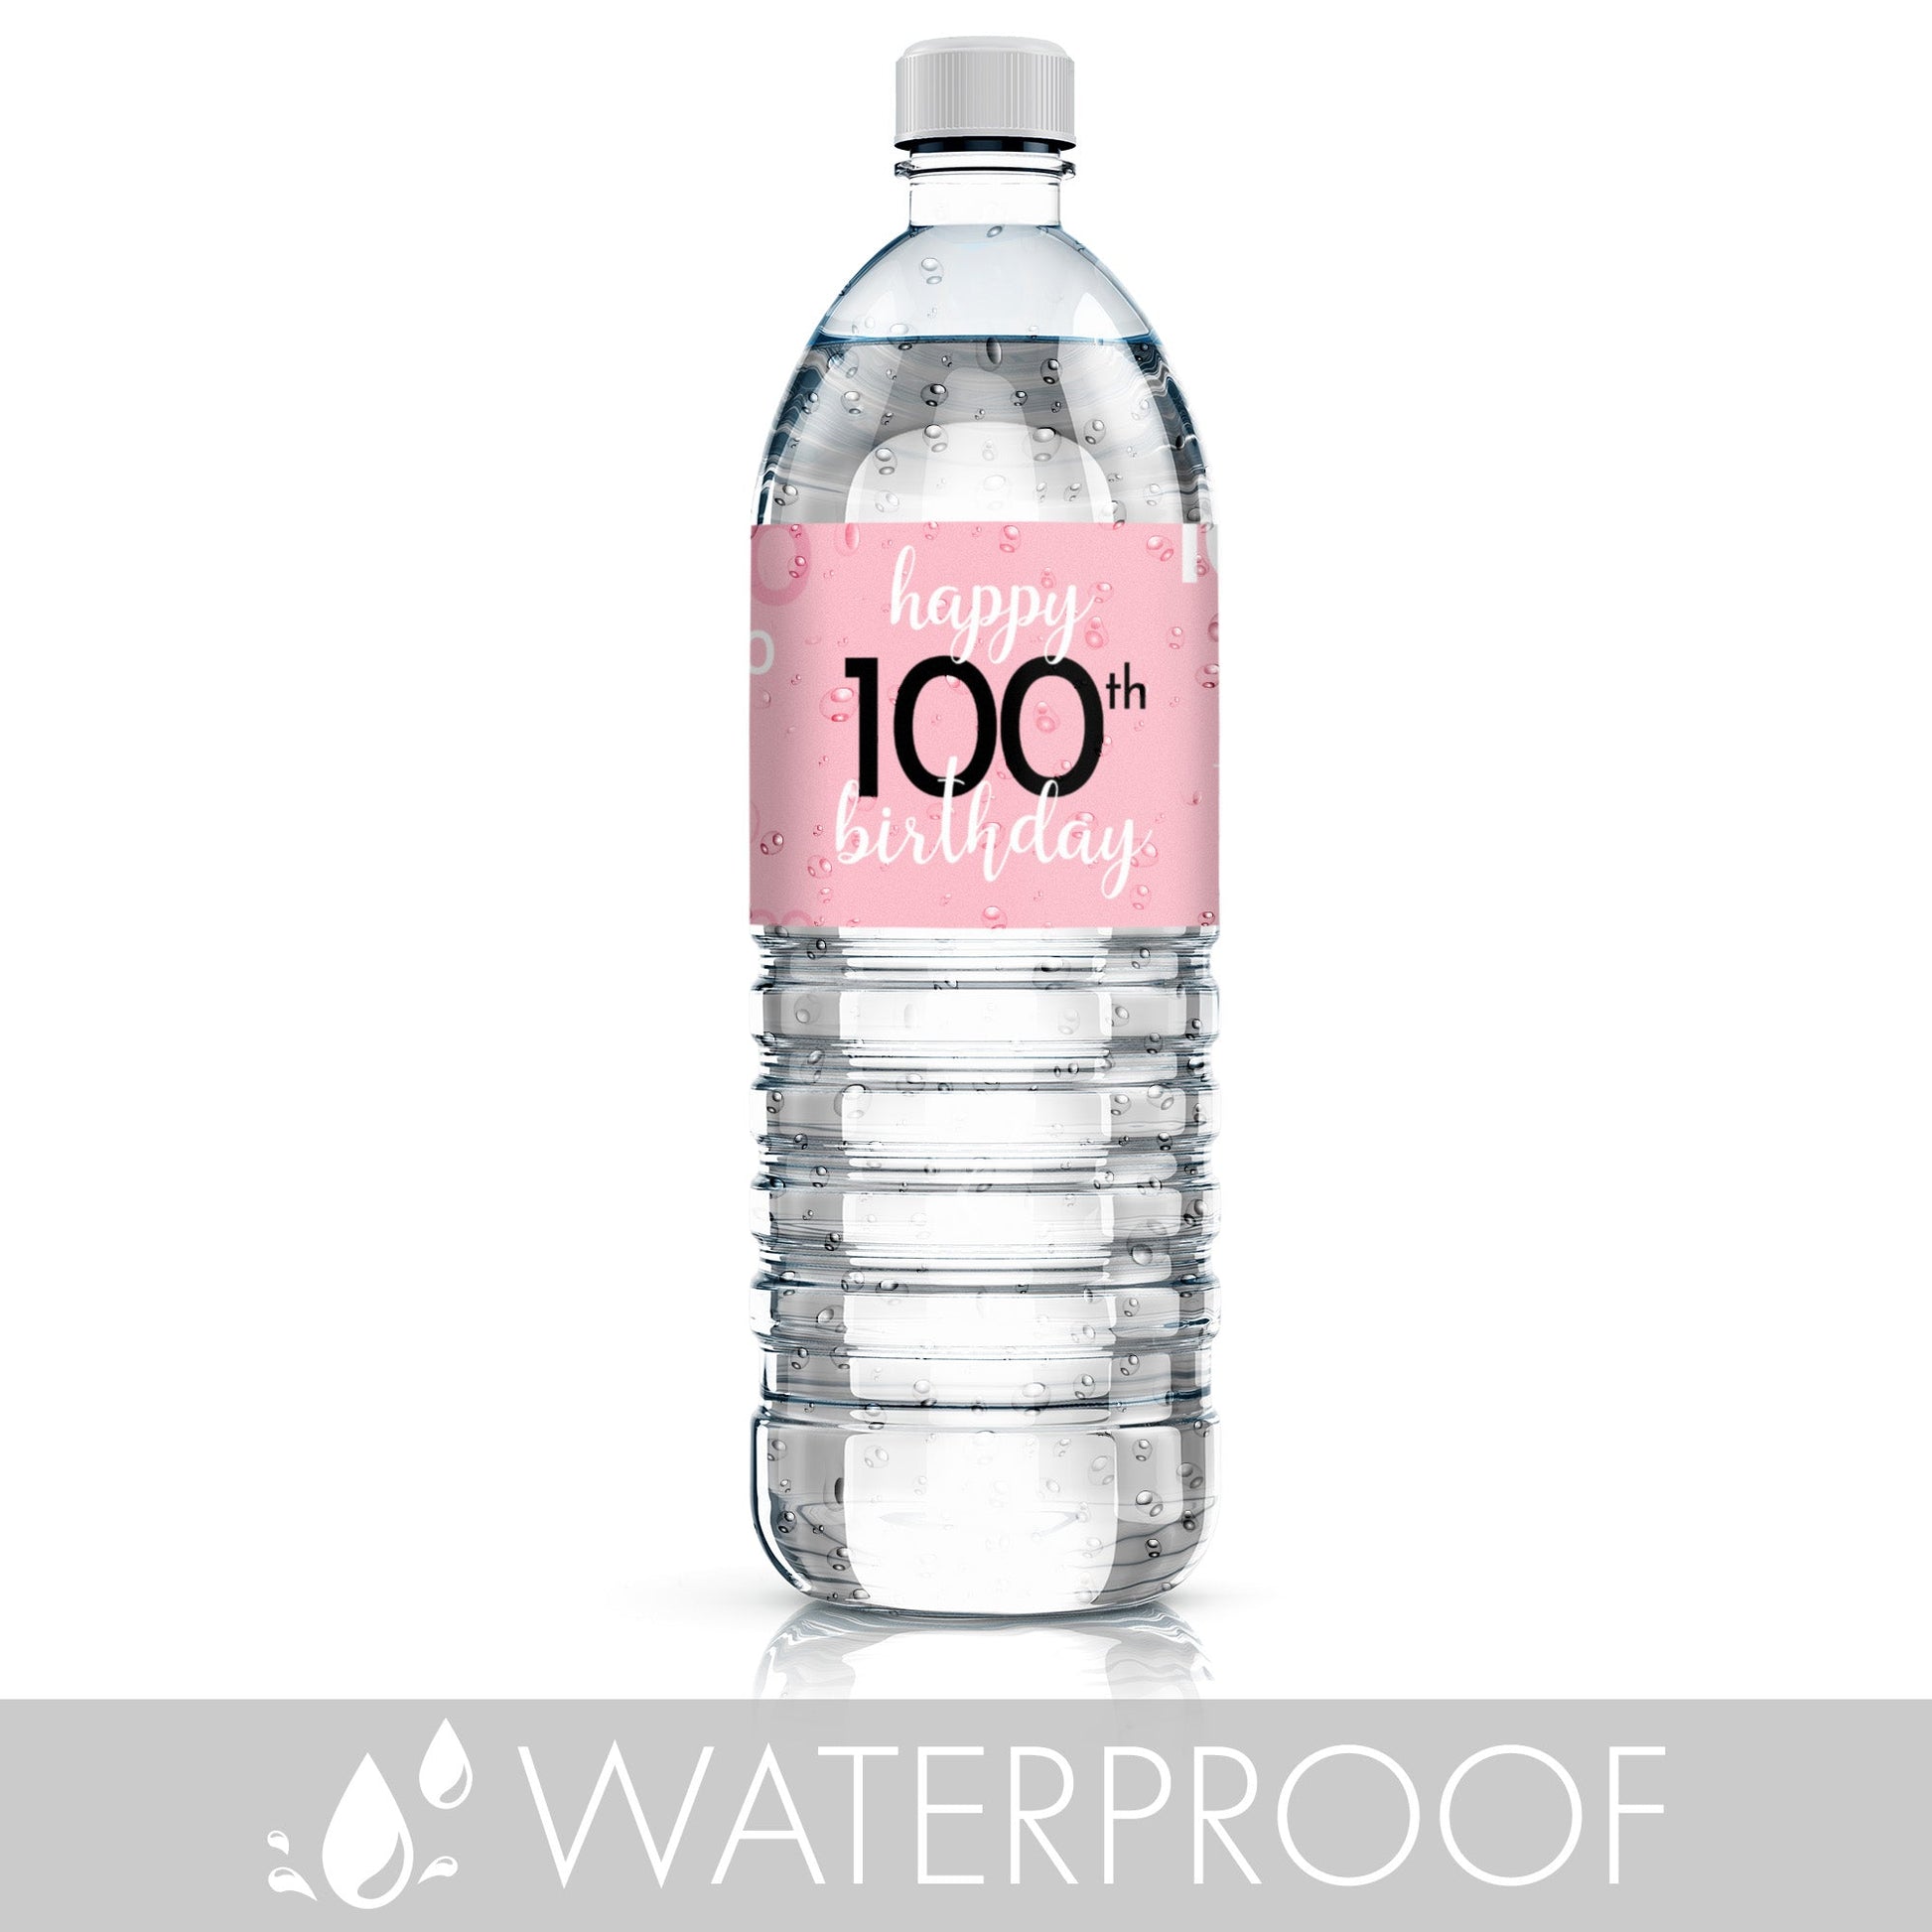 Personalize your water bottles with waterproof labels in a stylish 100th pink and black design